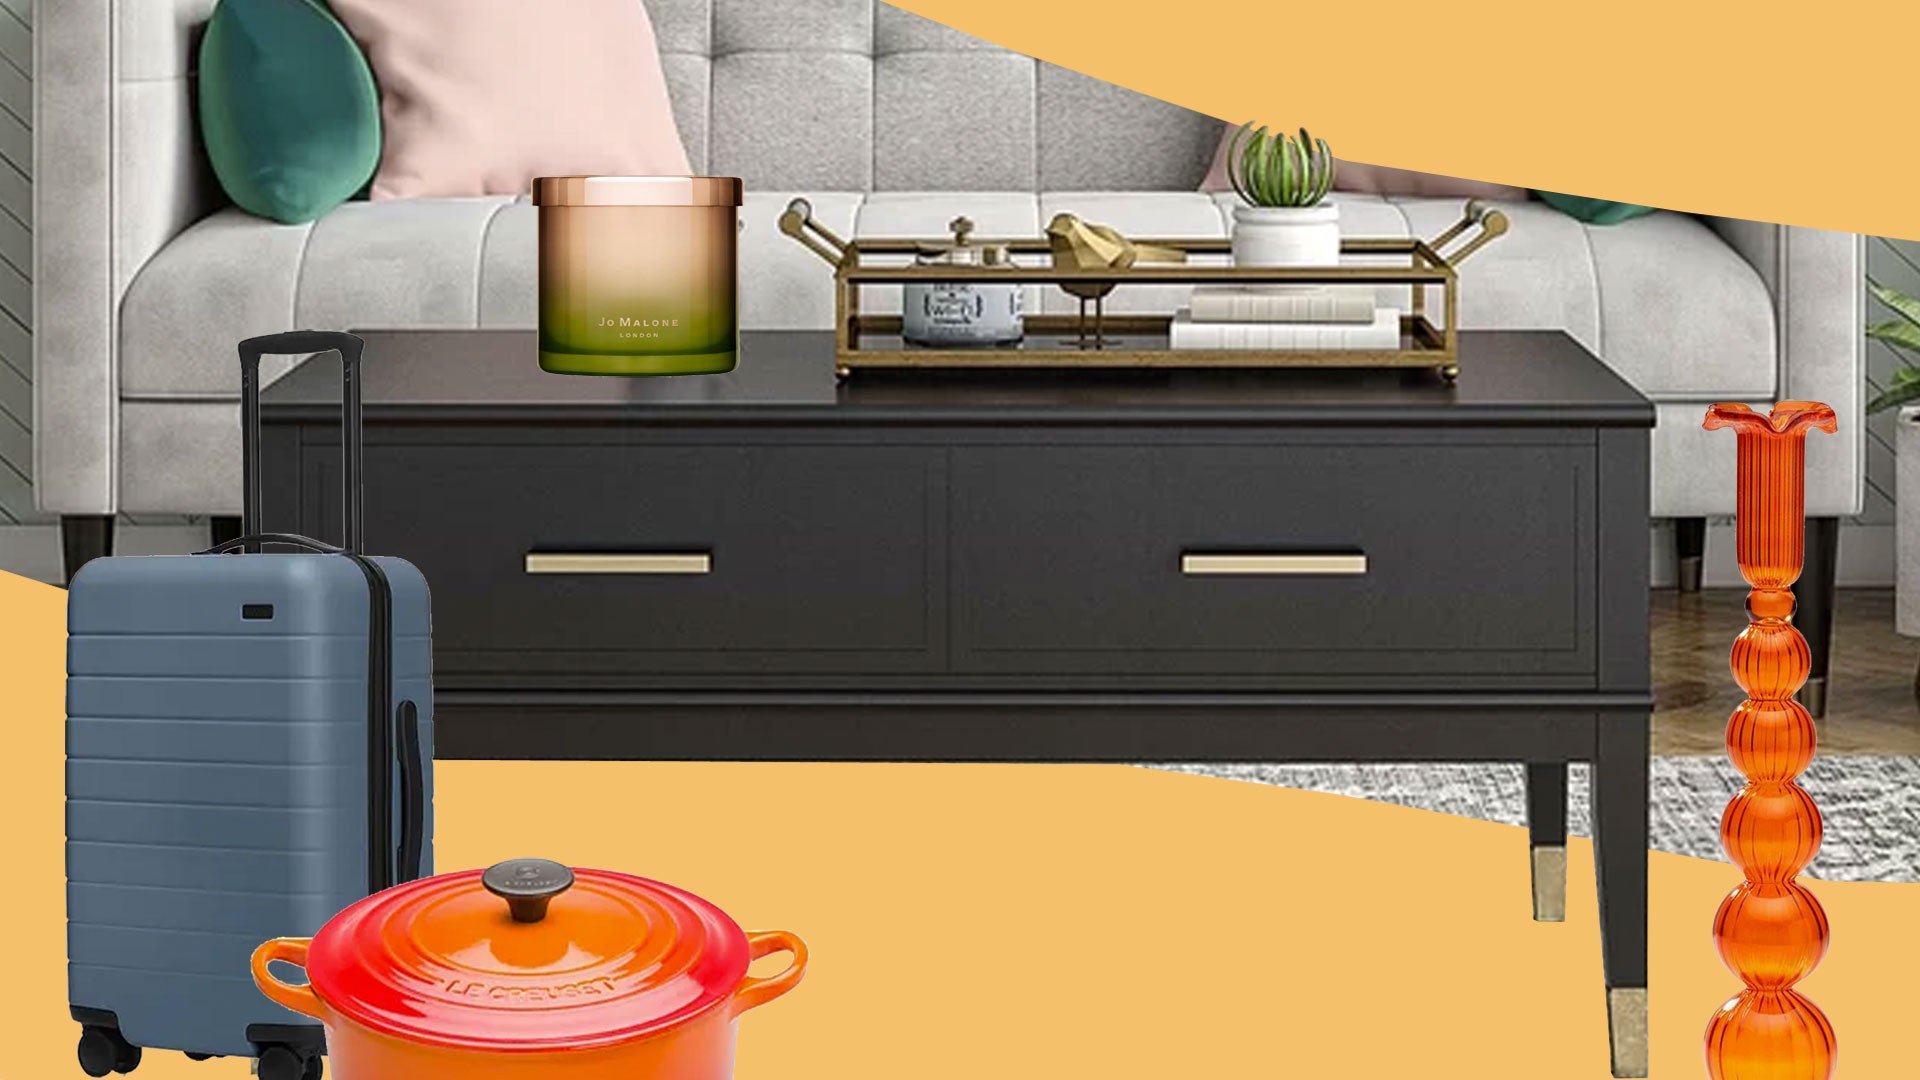 These are, without a doubt, the best Black Friday homeware deals of 2021